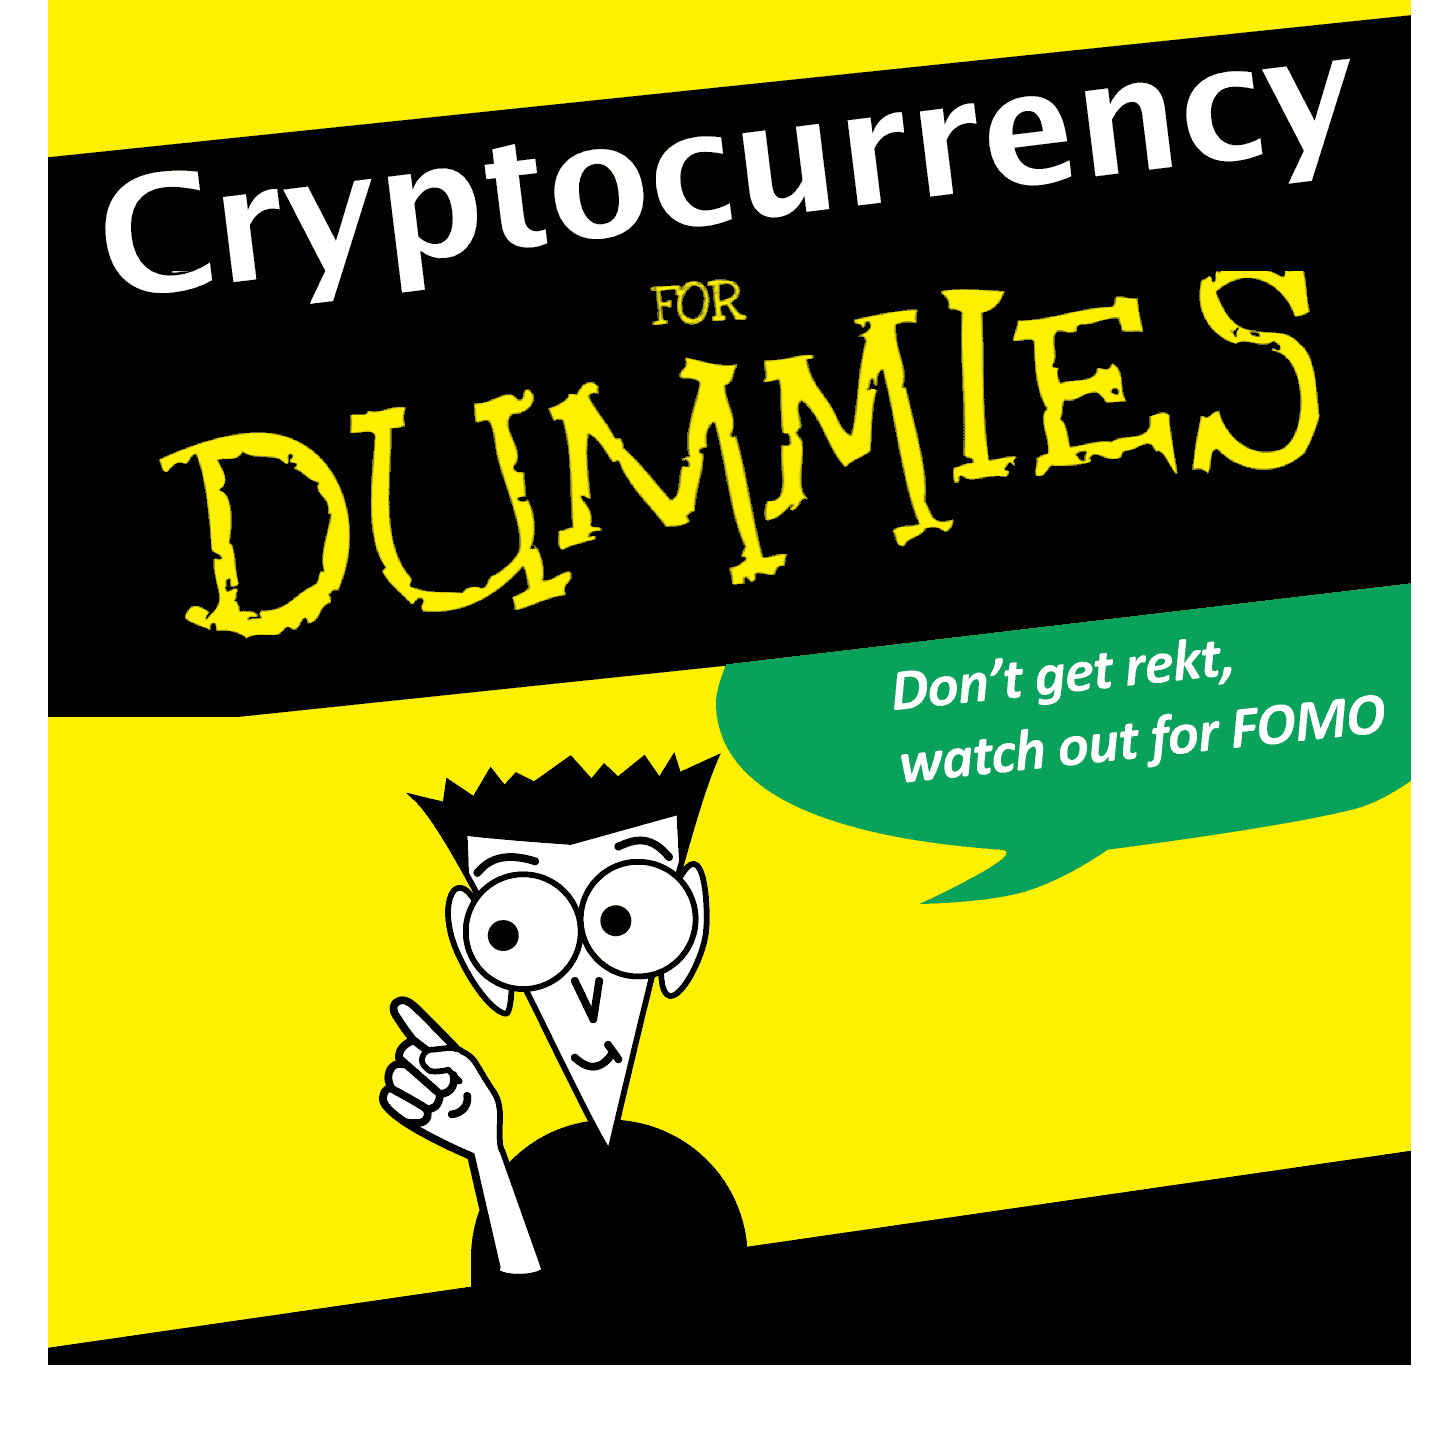 Trading For Dummies Cryptocurrency How Do I Buy A Bitcoin ...